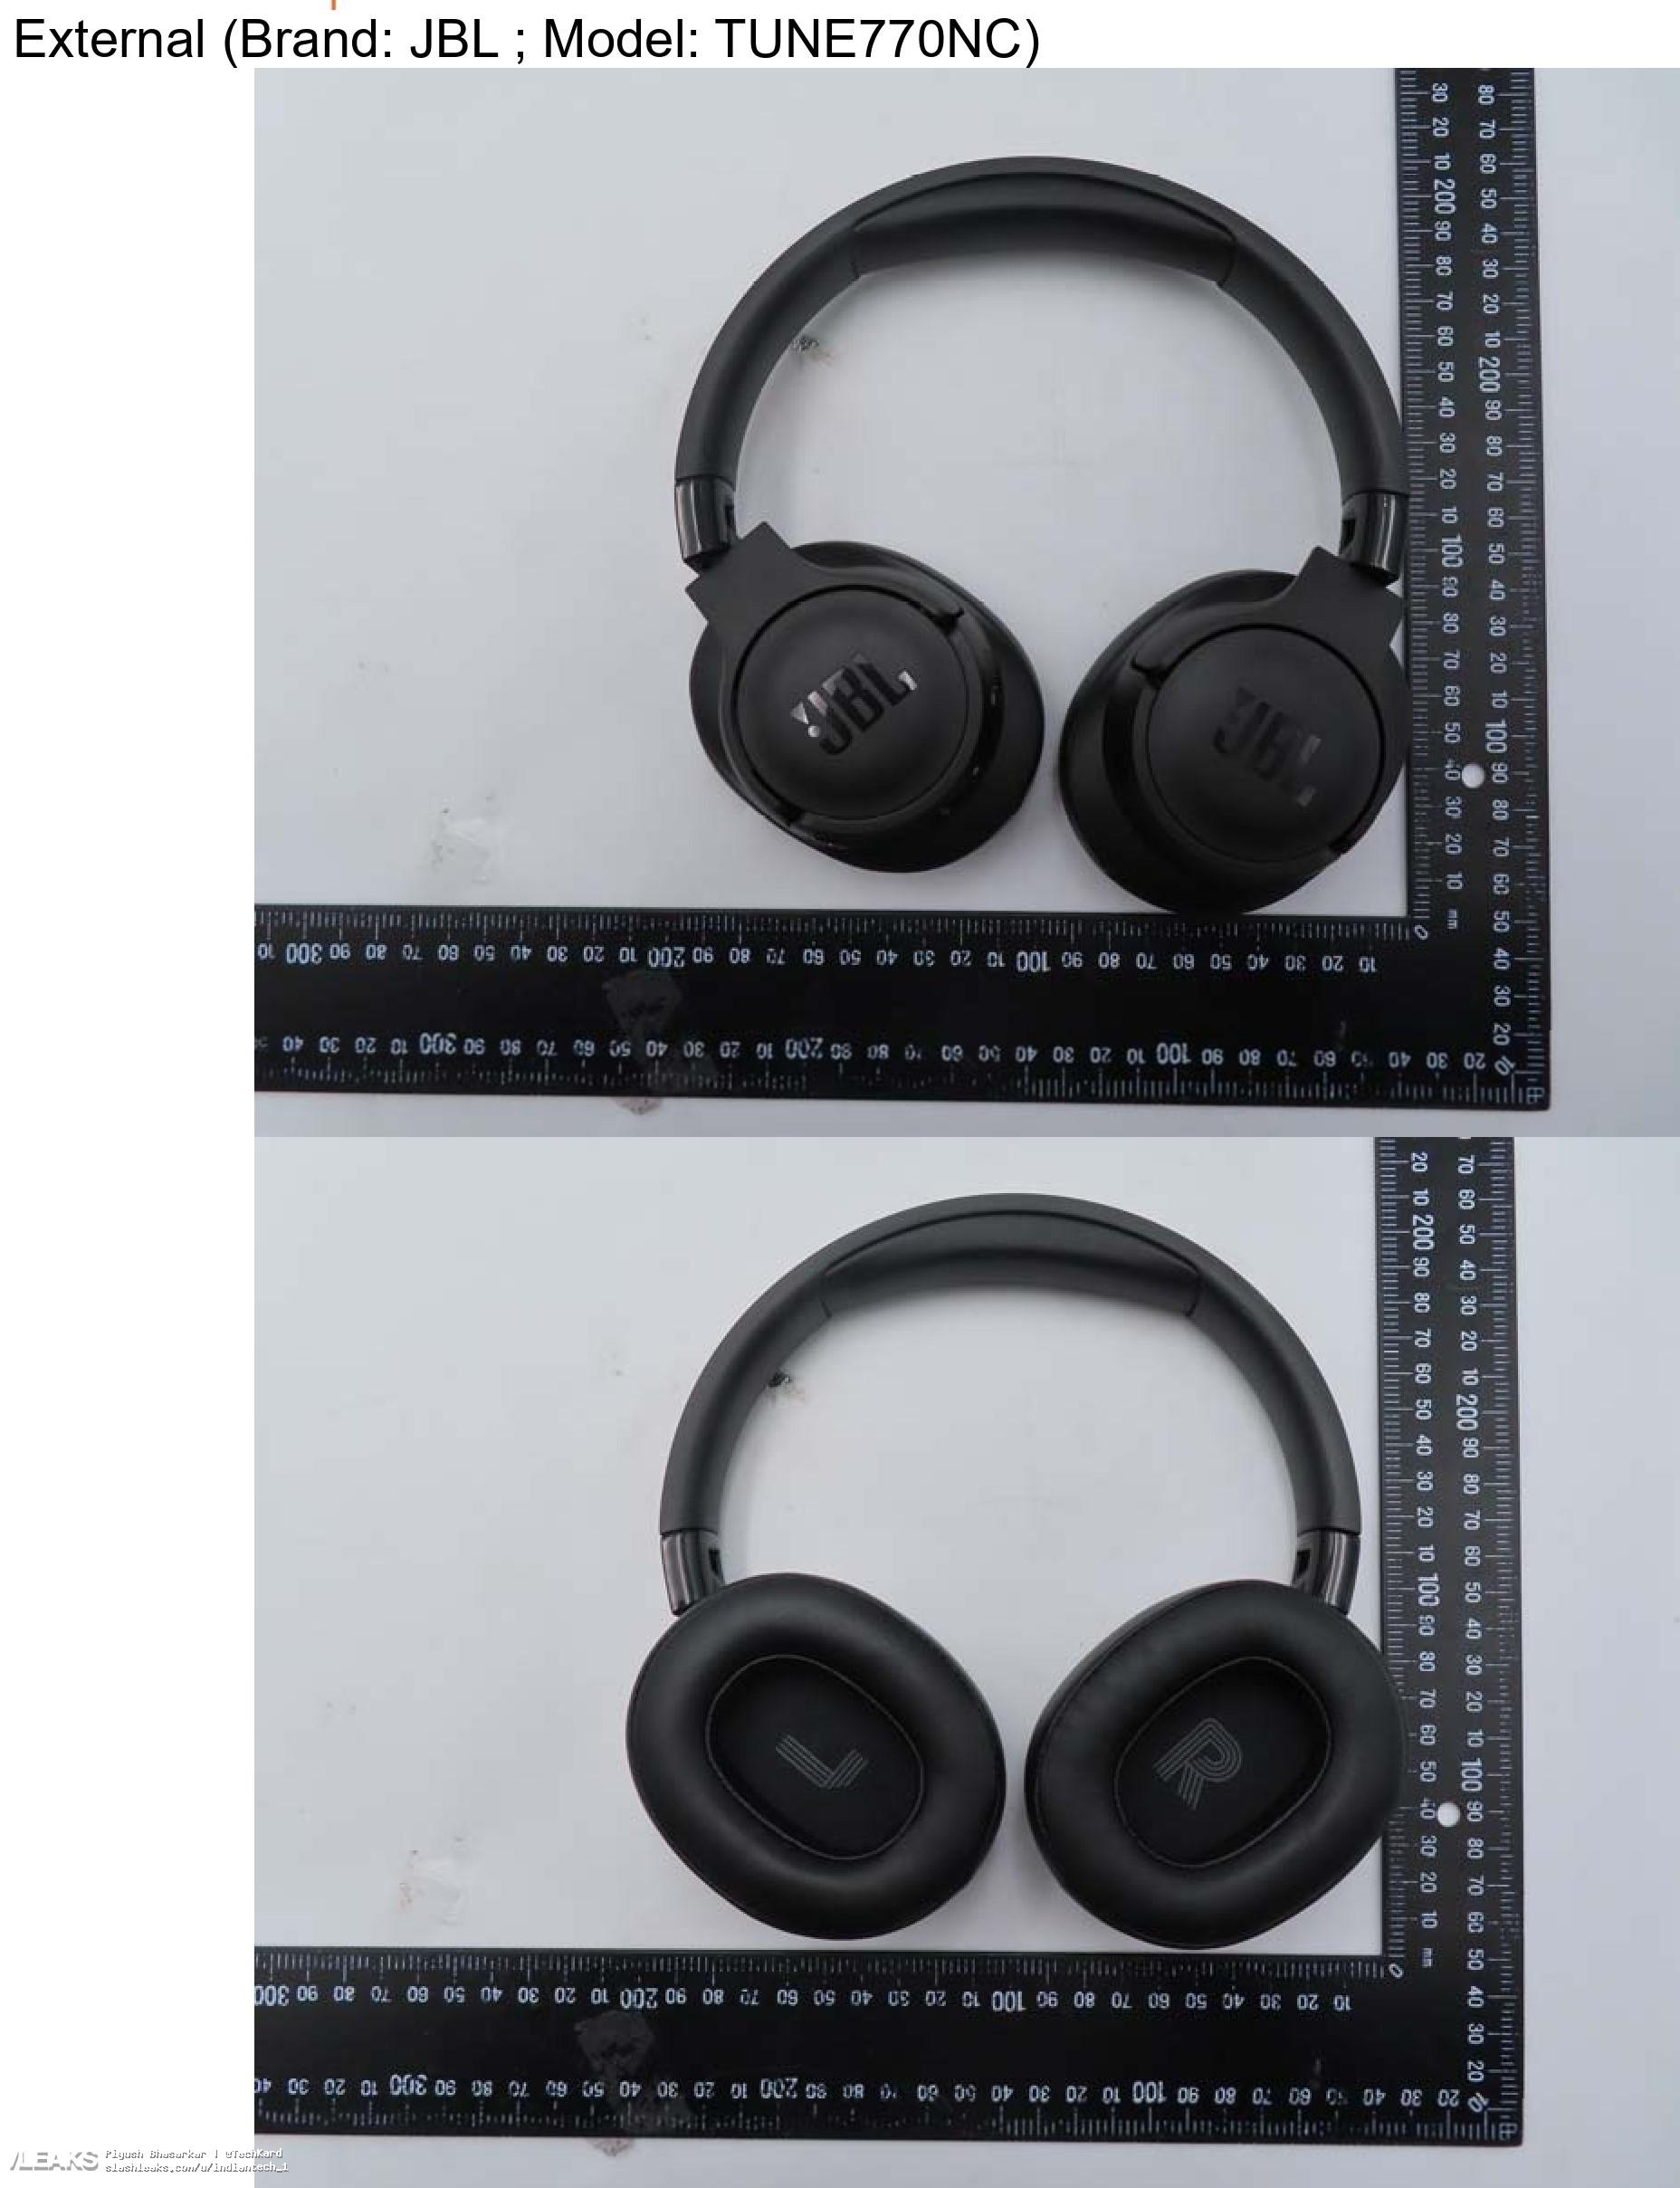 JBL Tune 770NC Wireless Over-Ear NC Headphones live images leaked